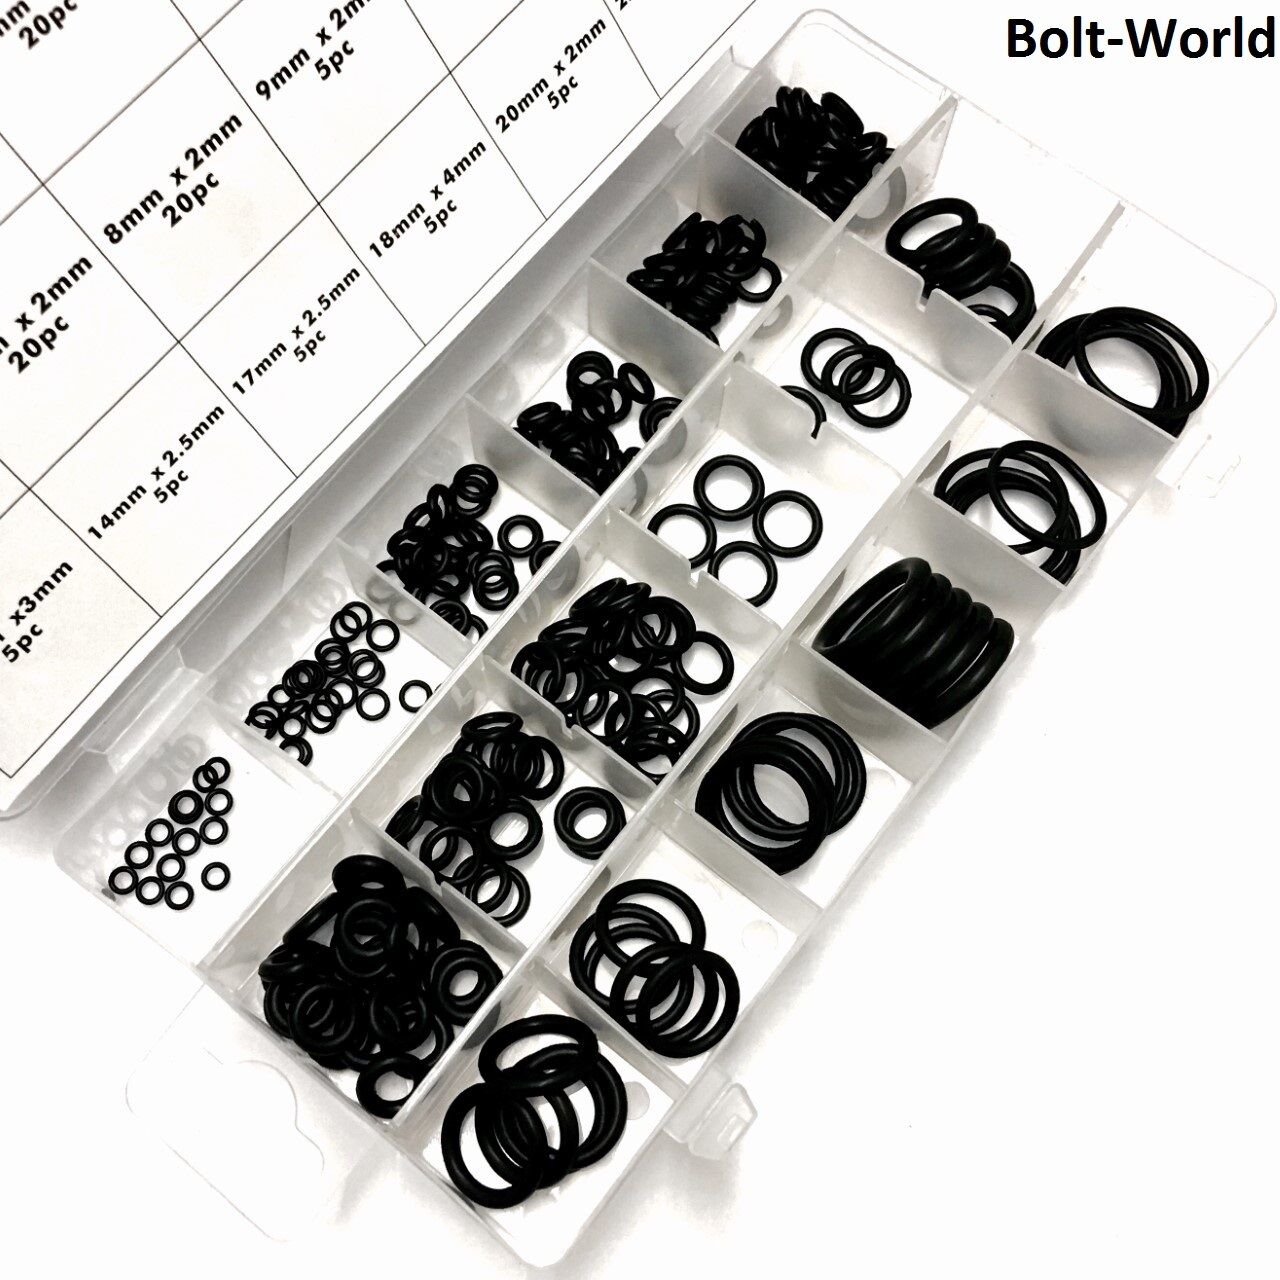 10pcs Black NBR O Ring Seal Gasket Thickness CS 2mm OD 8mm-150mm Nitrile Rubber  O-Ring Waterproof Oil Resistant Sealing Washer